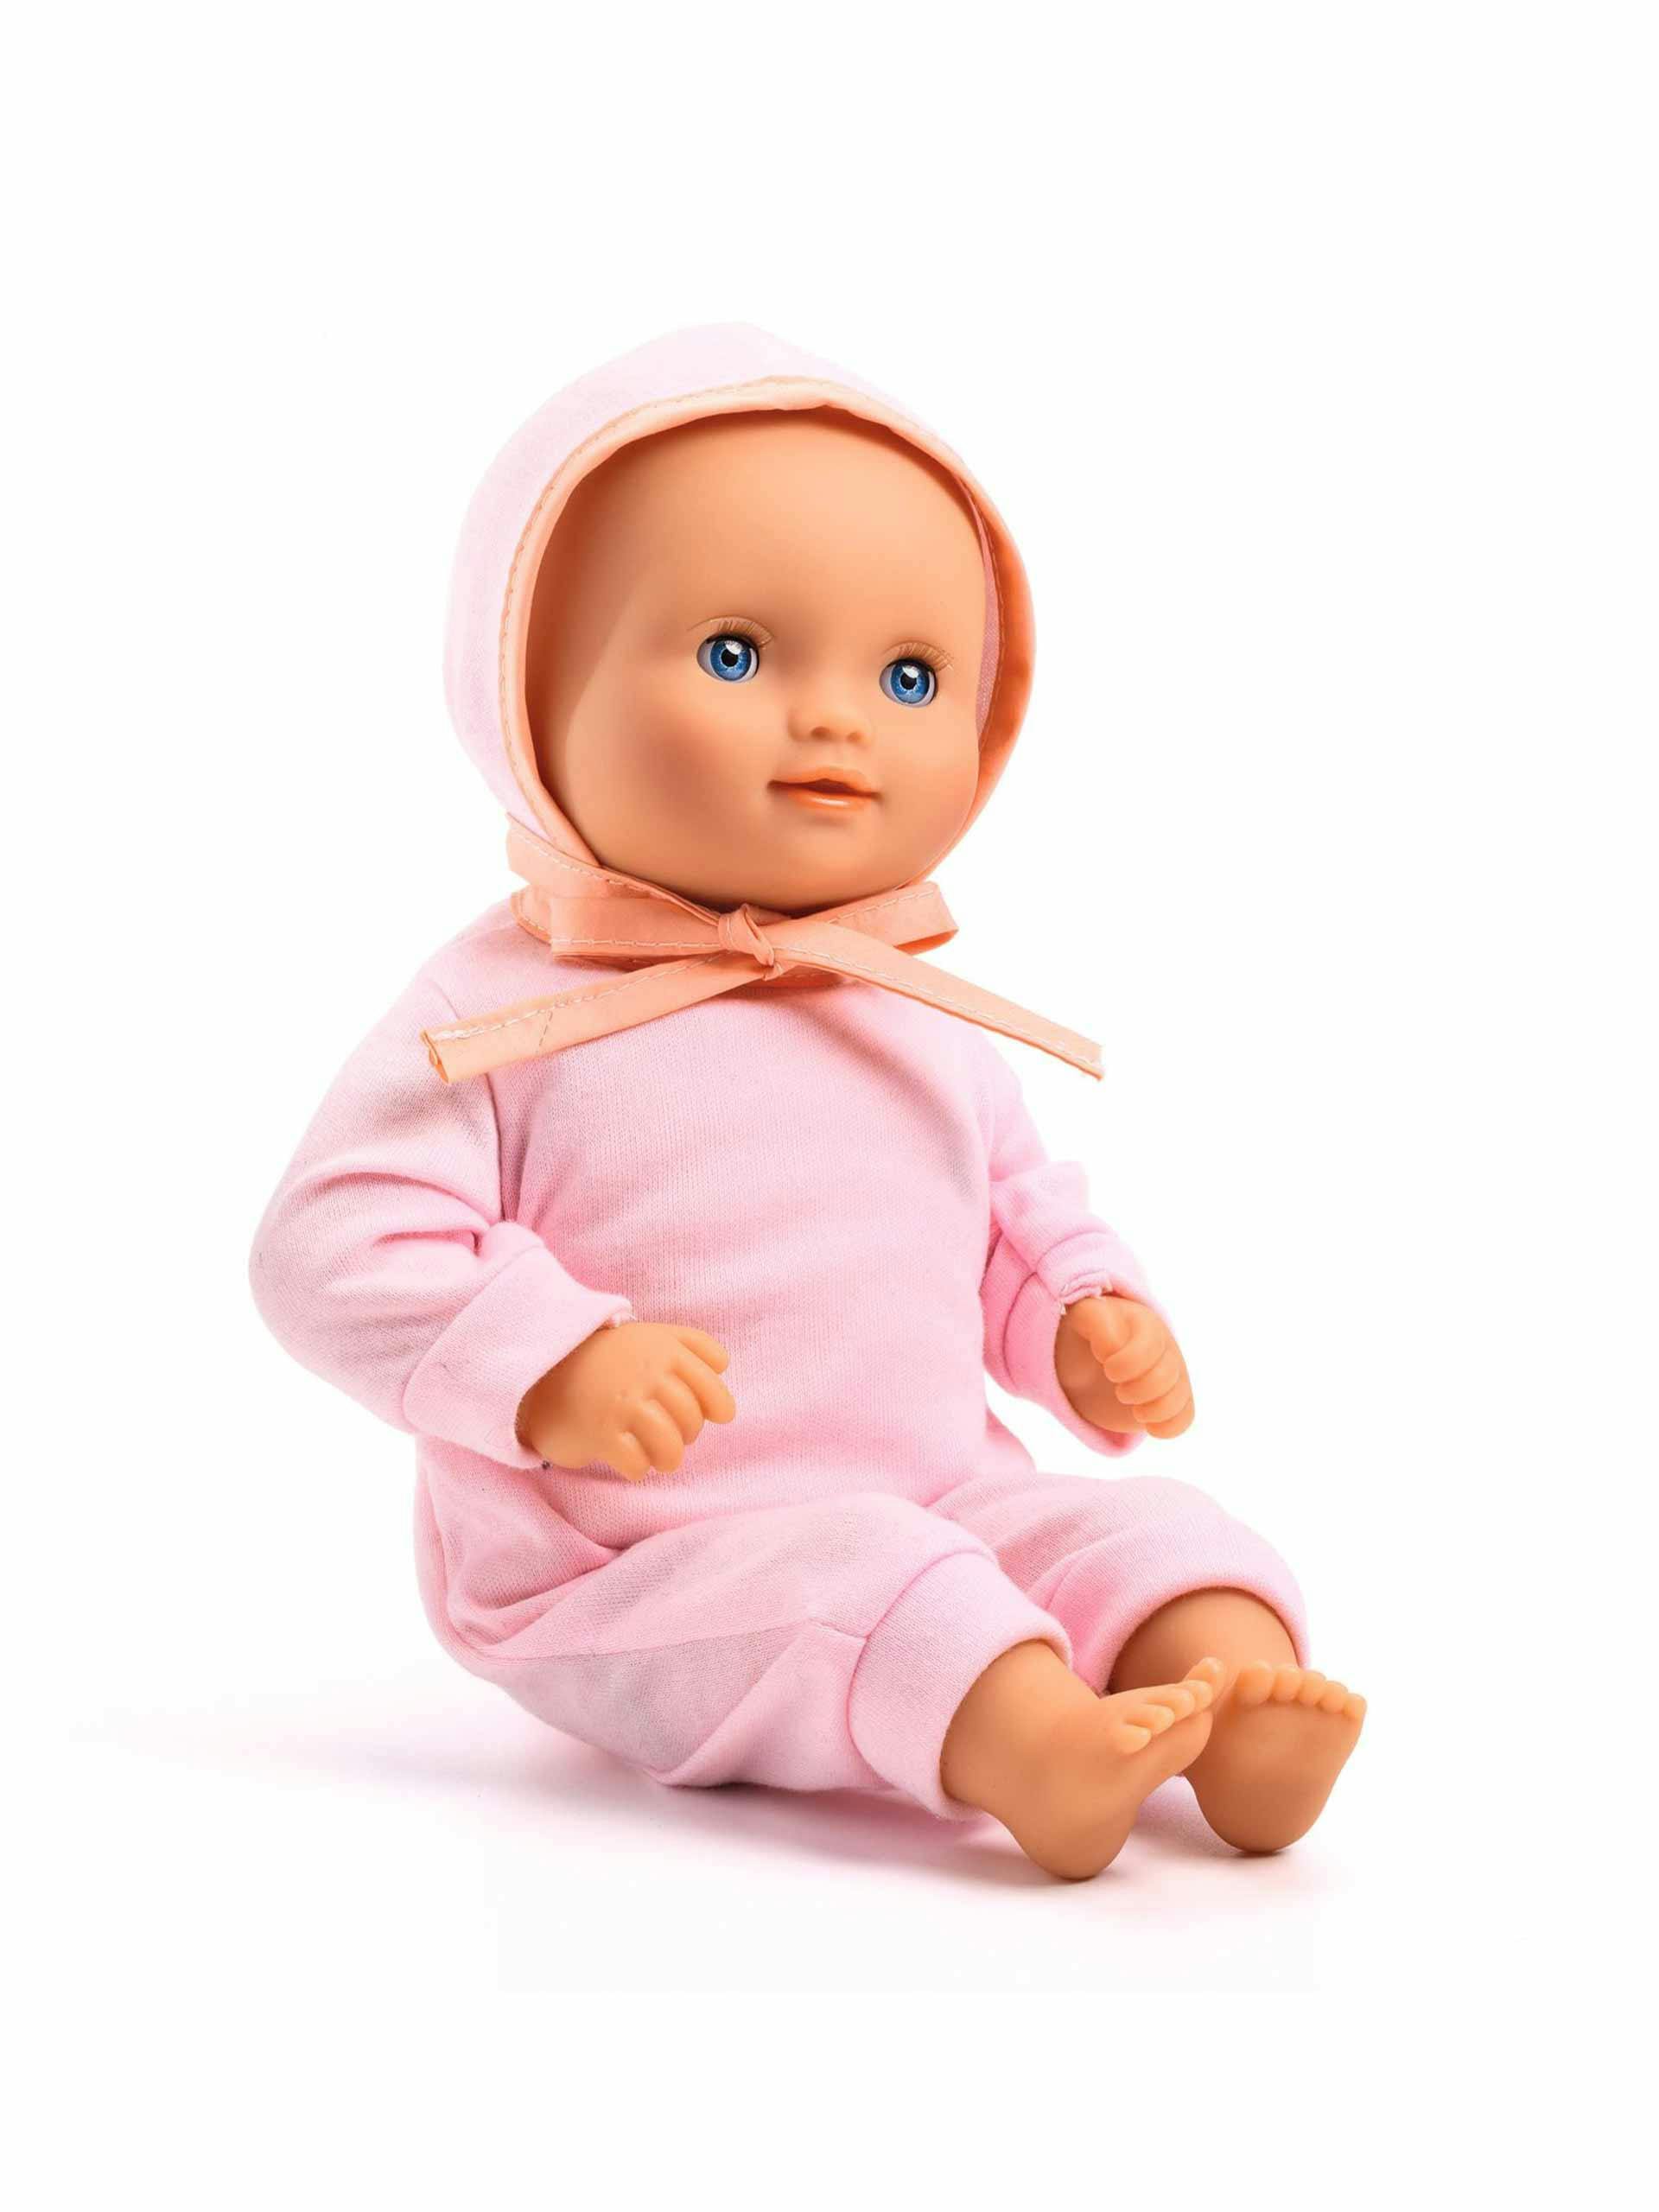 Lilas Rose baby doll